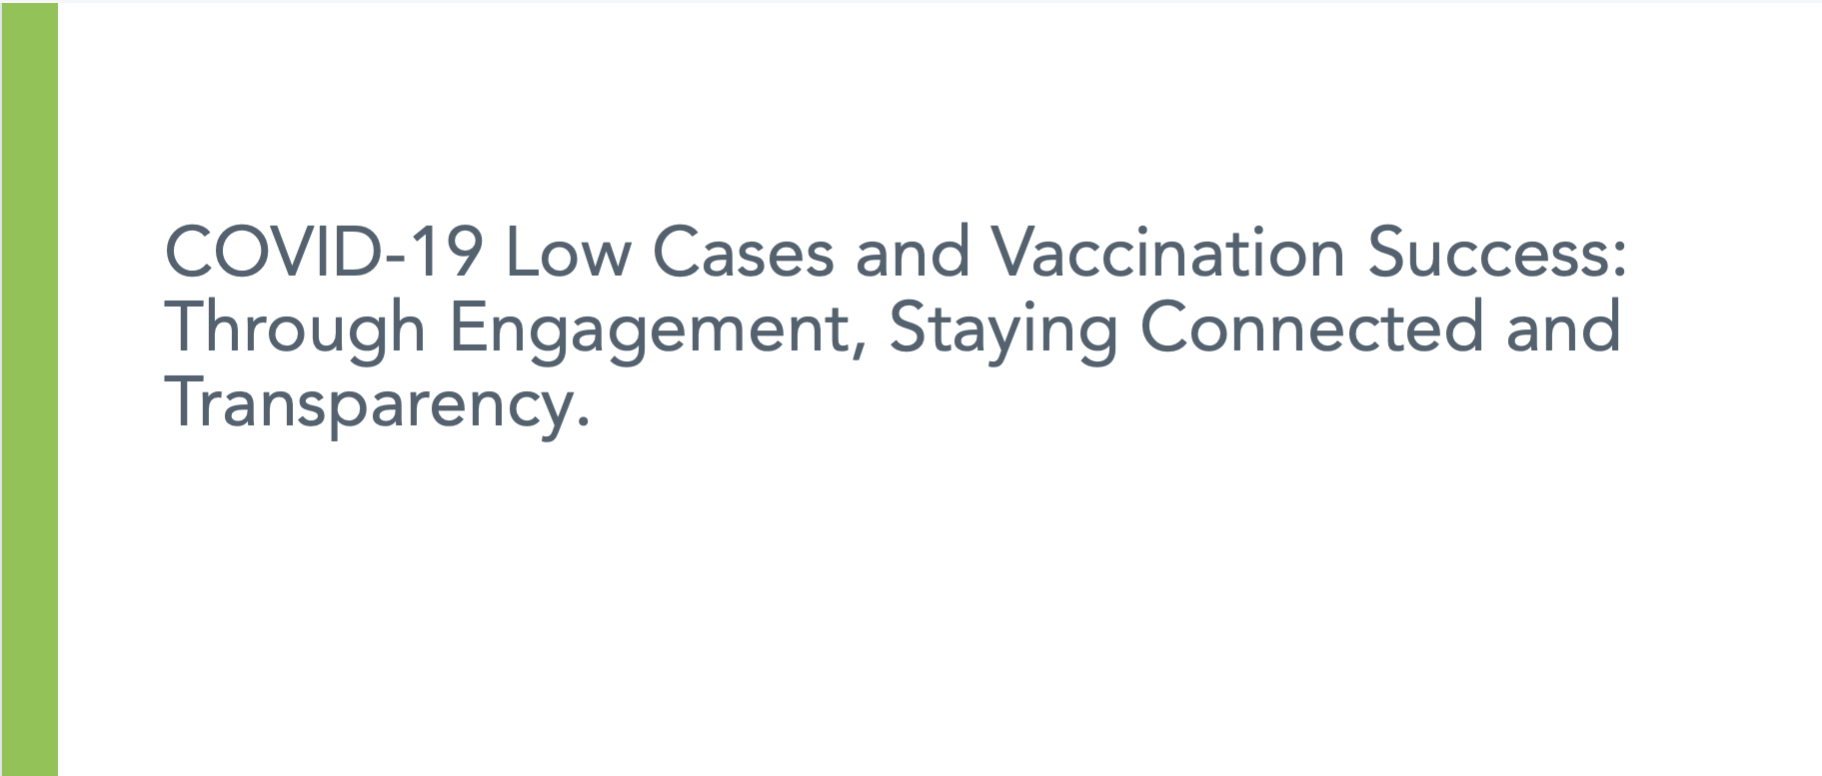 COVID-19 Low Cases and Vaccination Success: Through Engagement, Staying Connected and Transparency